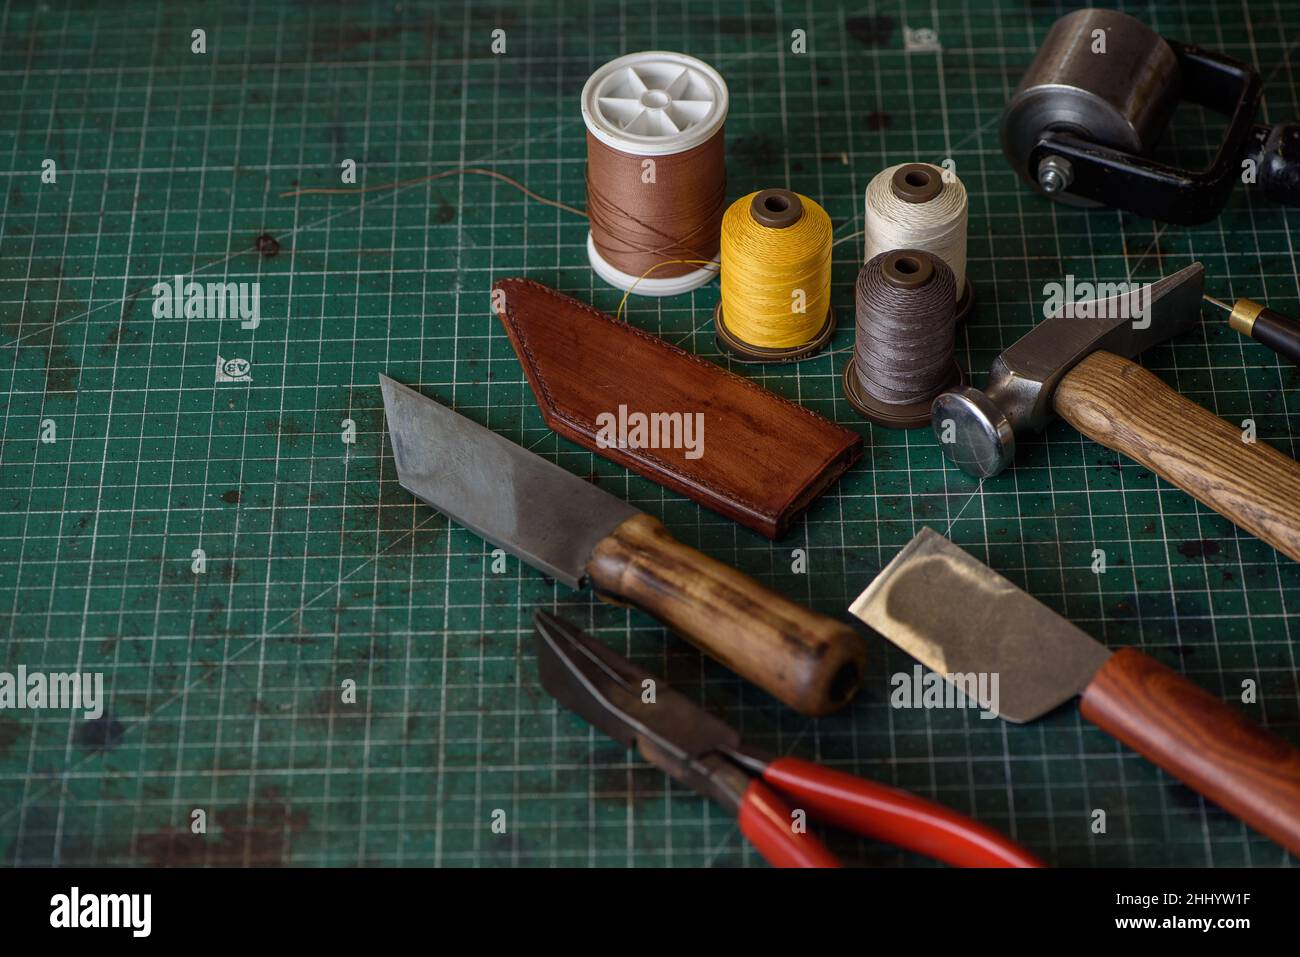 Bushcraft Equipment And Leather Materials Stock Photo - Download Image Now  - Gardening Equipment, Making, Shoe - iStock